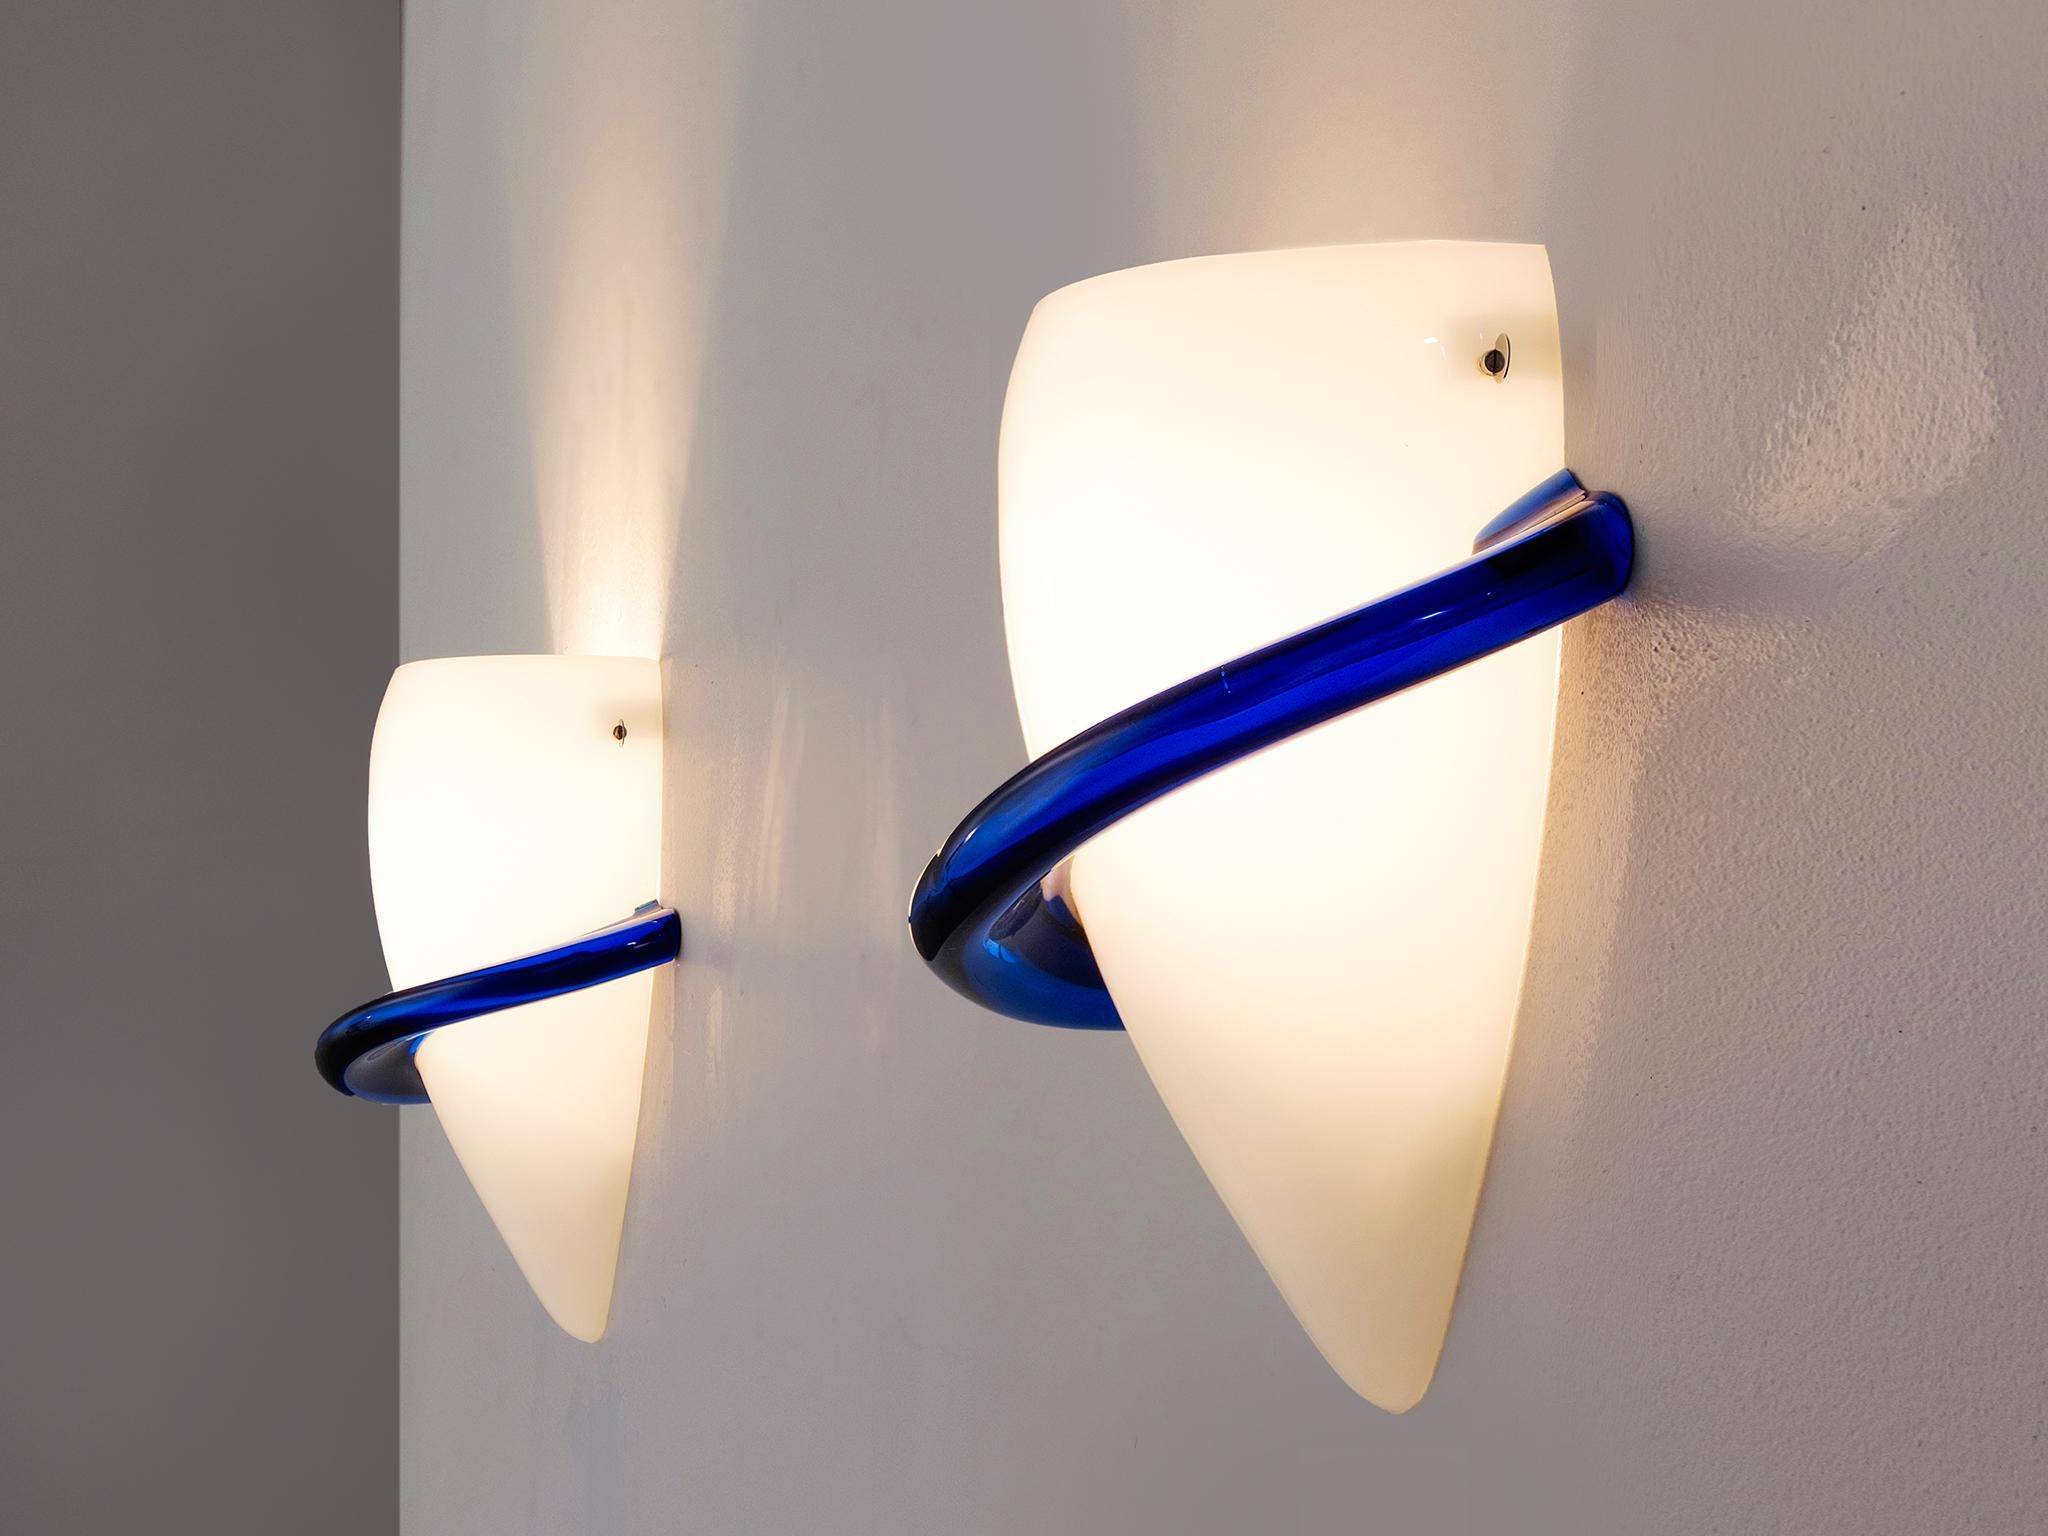 Tina Marie Aufiero for Venini, pair of sconces, glass, Italy 1985.

Elegant pair of wall-lights in white and blue colored glass by the Italian manufacturer Venini. These lights show soft and curved forms, which gives them their elegance. The blue